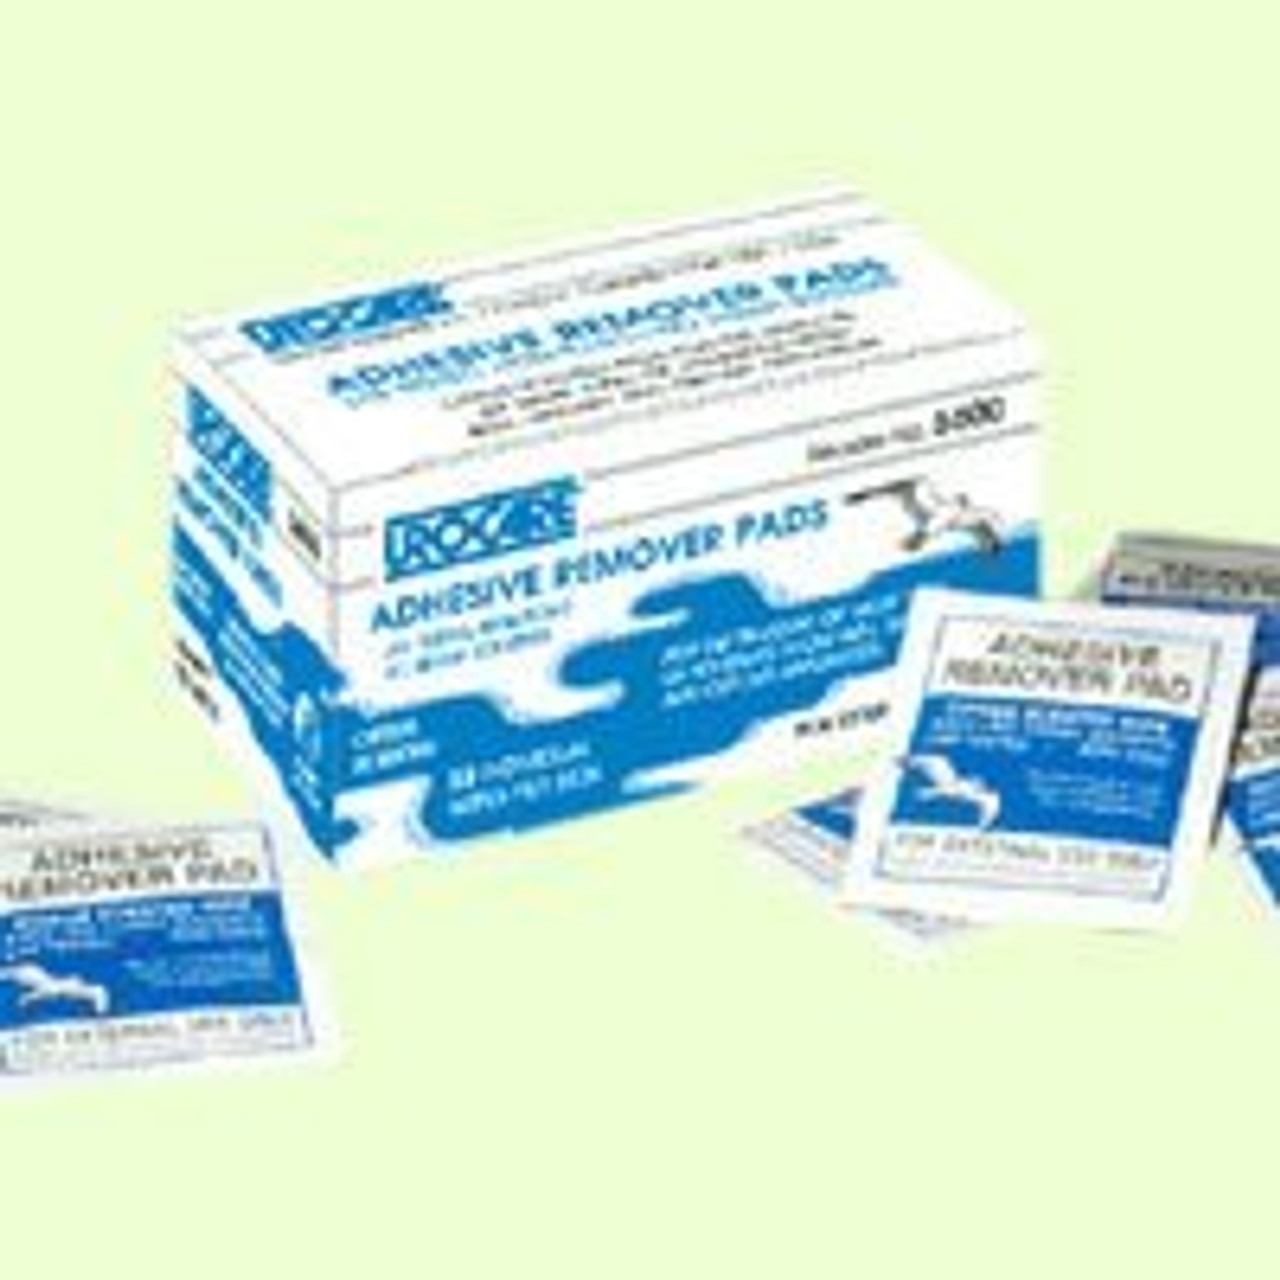 Urocare - Adhesive Remover Wipes